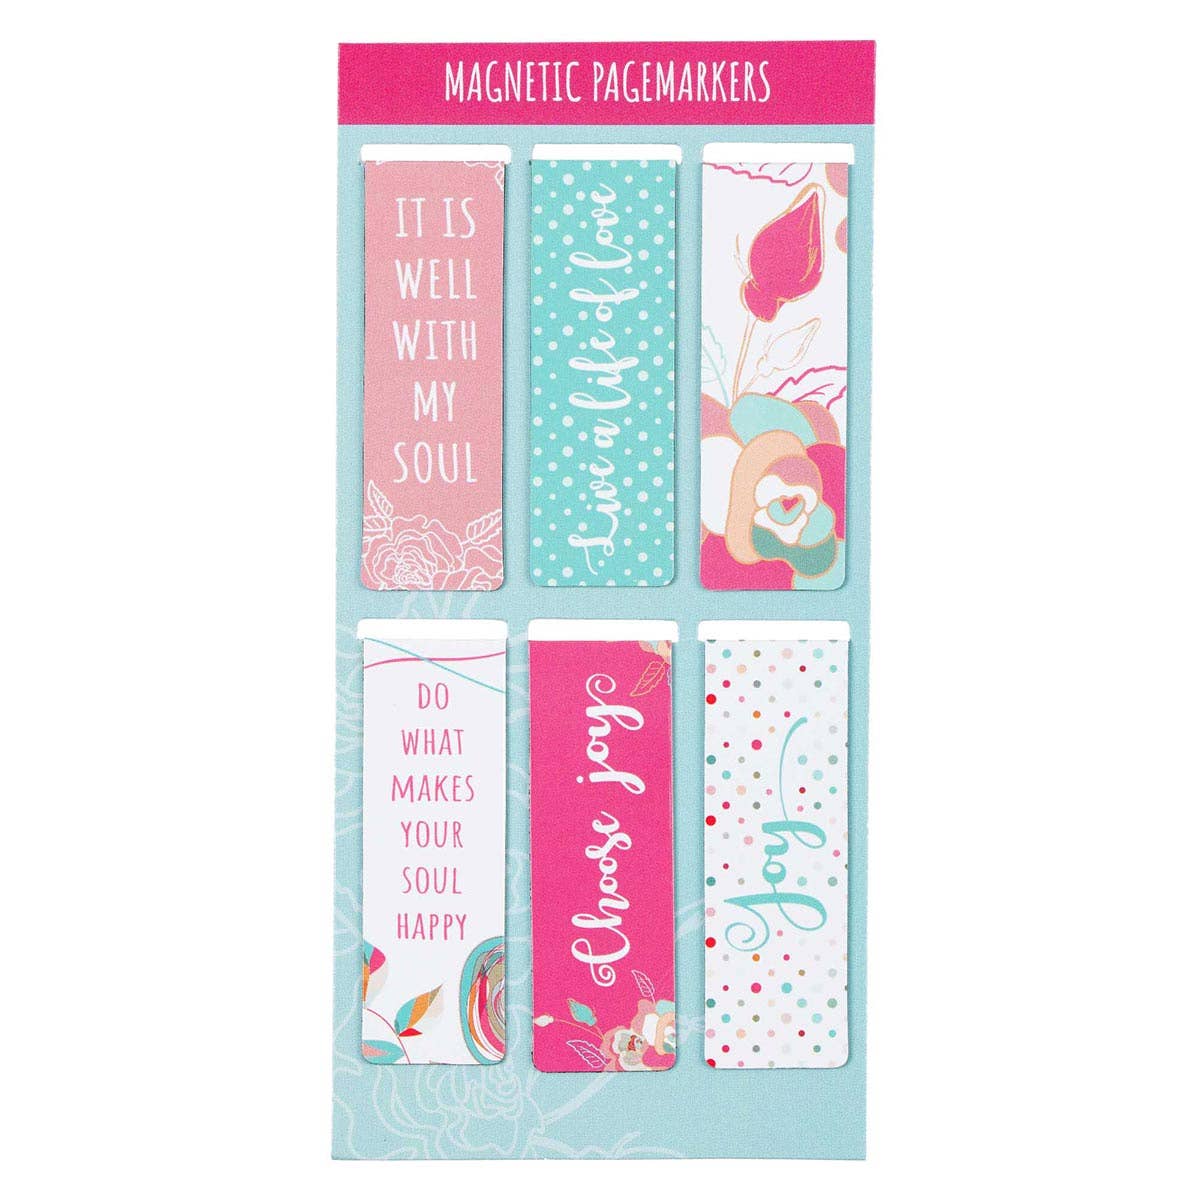 Featured is a pack of 6 magnetic book marks. They say, do what makes your soul happy, choose joy, joy. It is well with my soul. The last has multi volors in pink, mint, nude, and turquoise. 